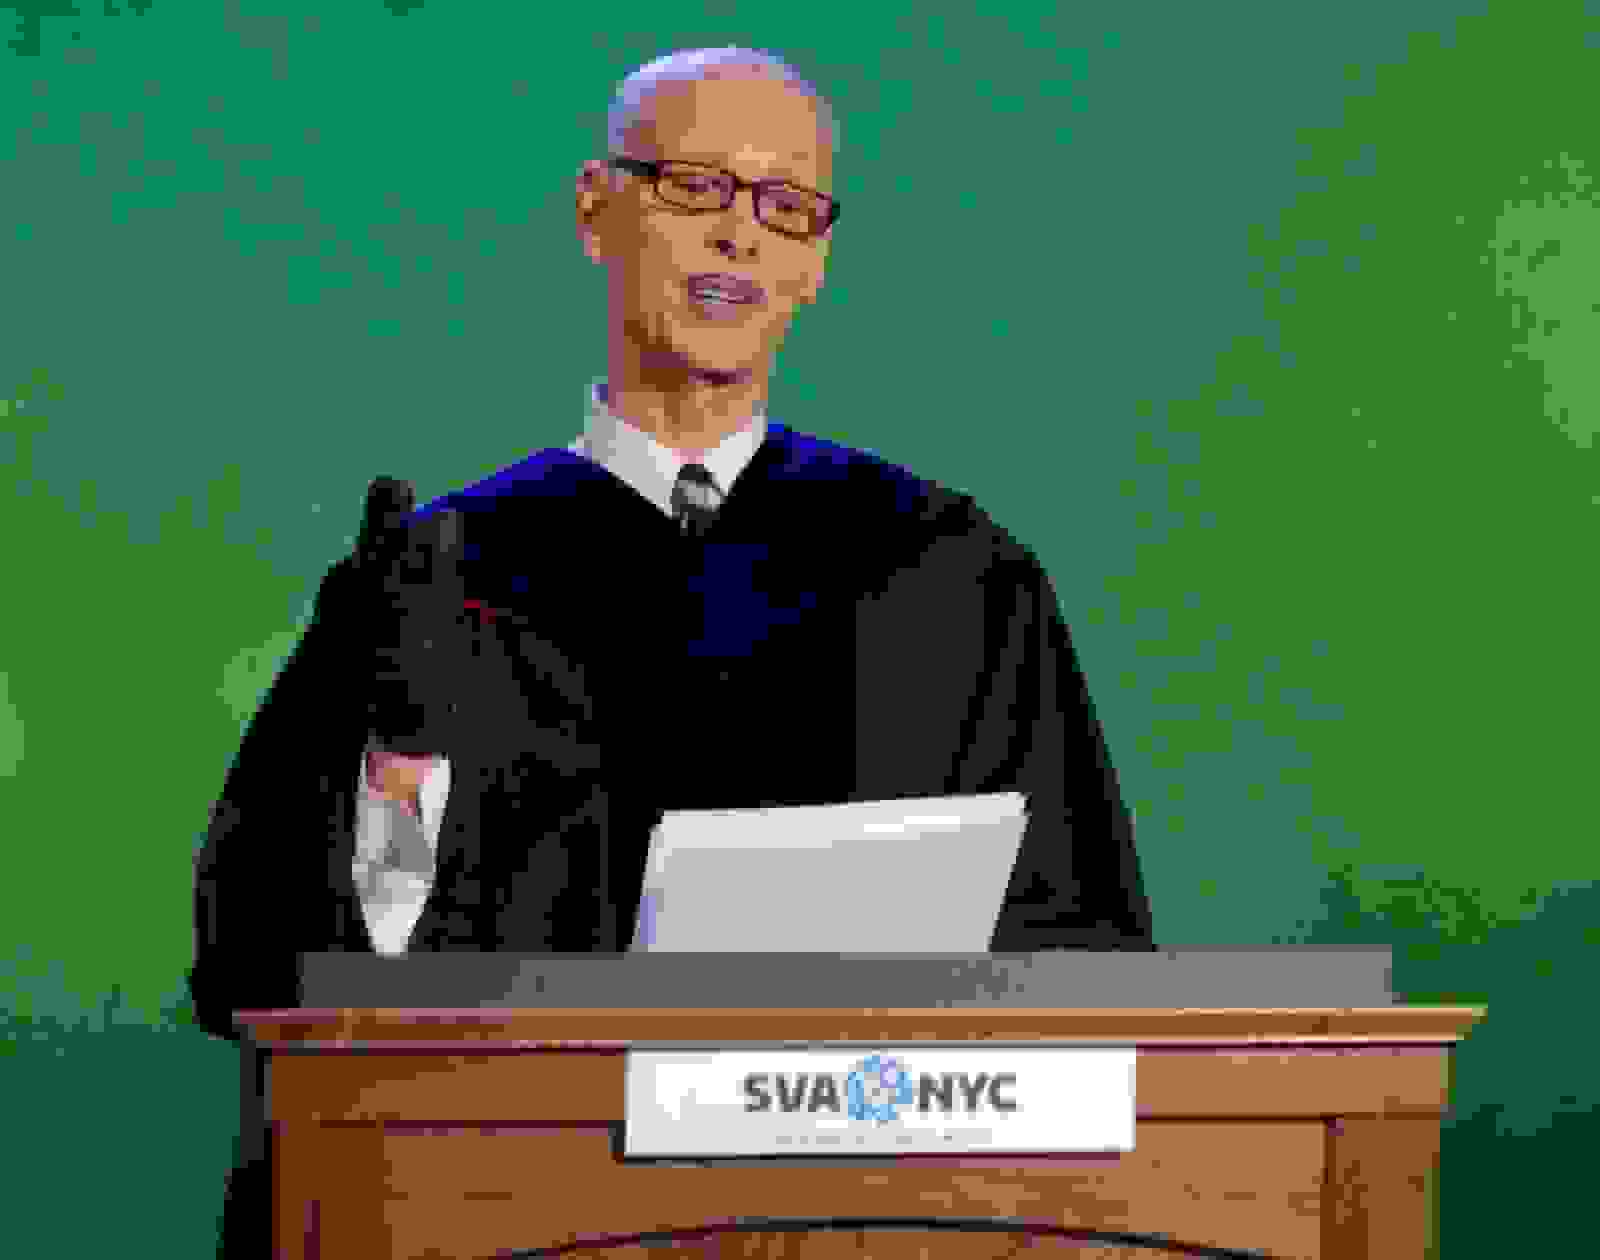 A photo of a man in a tie and graduation gown, standing at a podium set in front of a green screen.